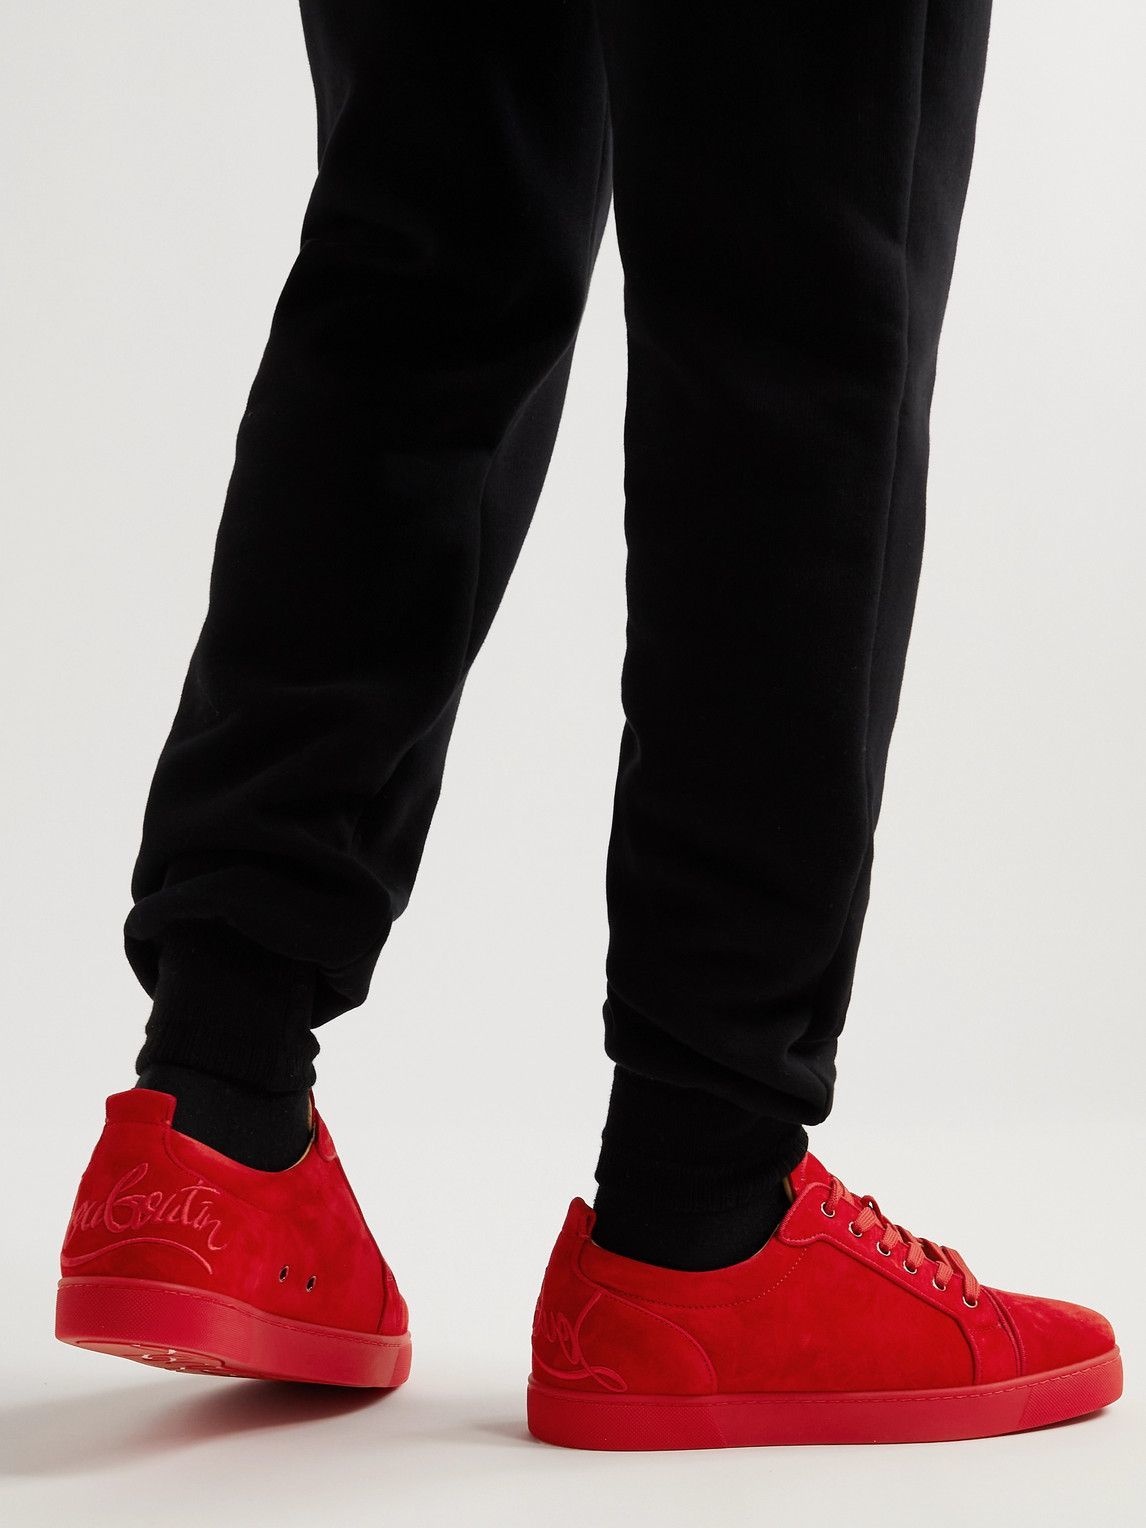 Louis Junior Spikes Sneakers in Red - Christian Louboutin